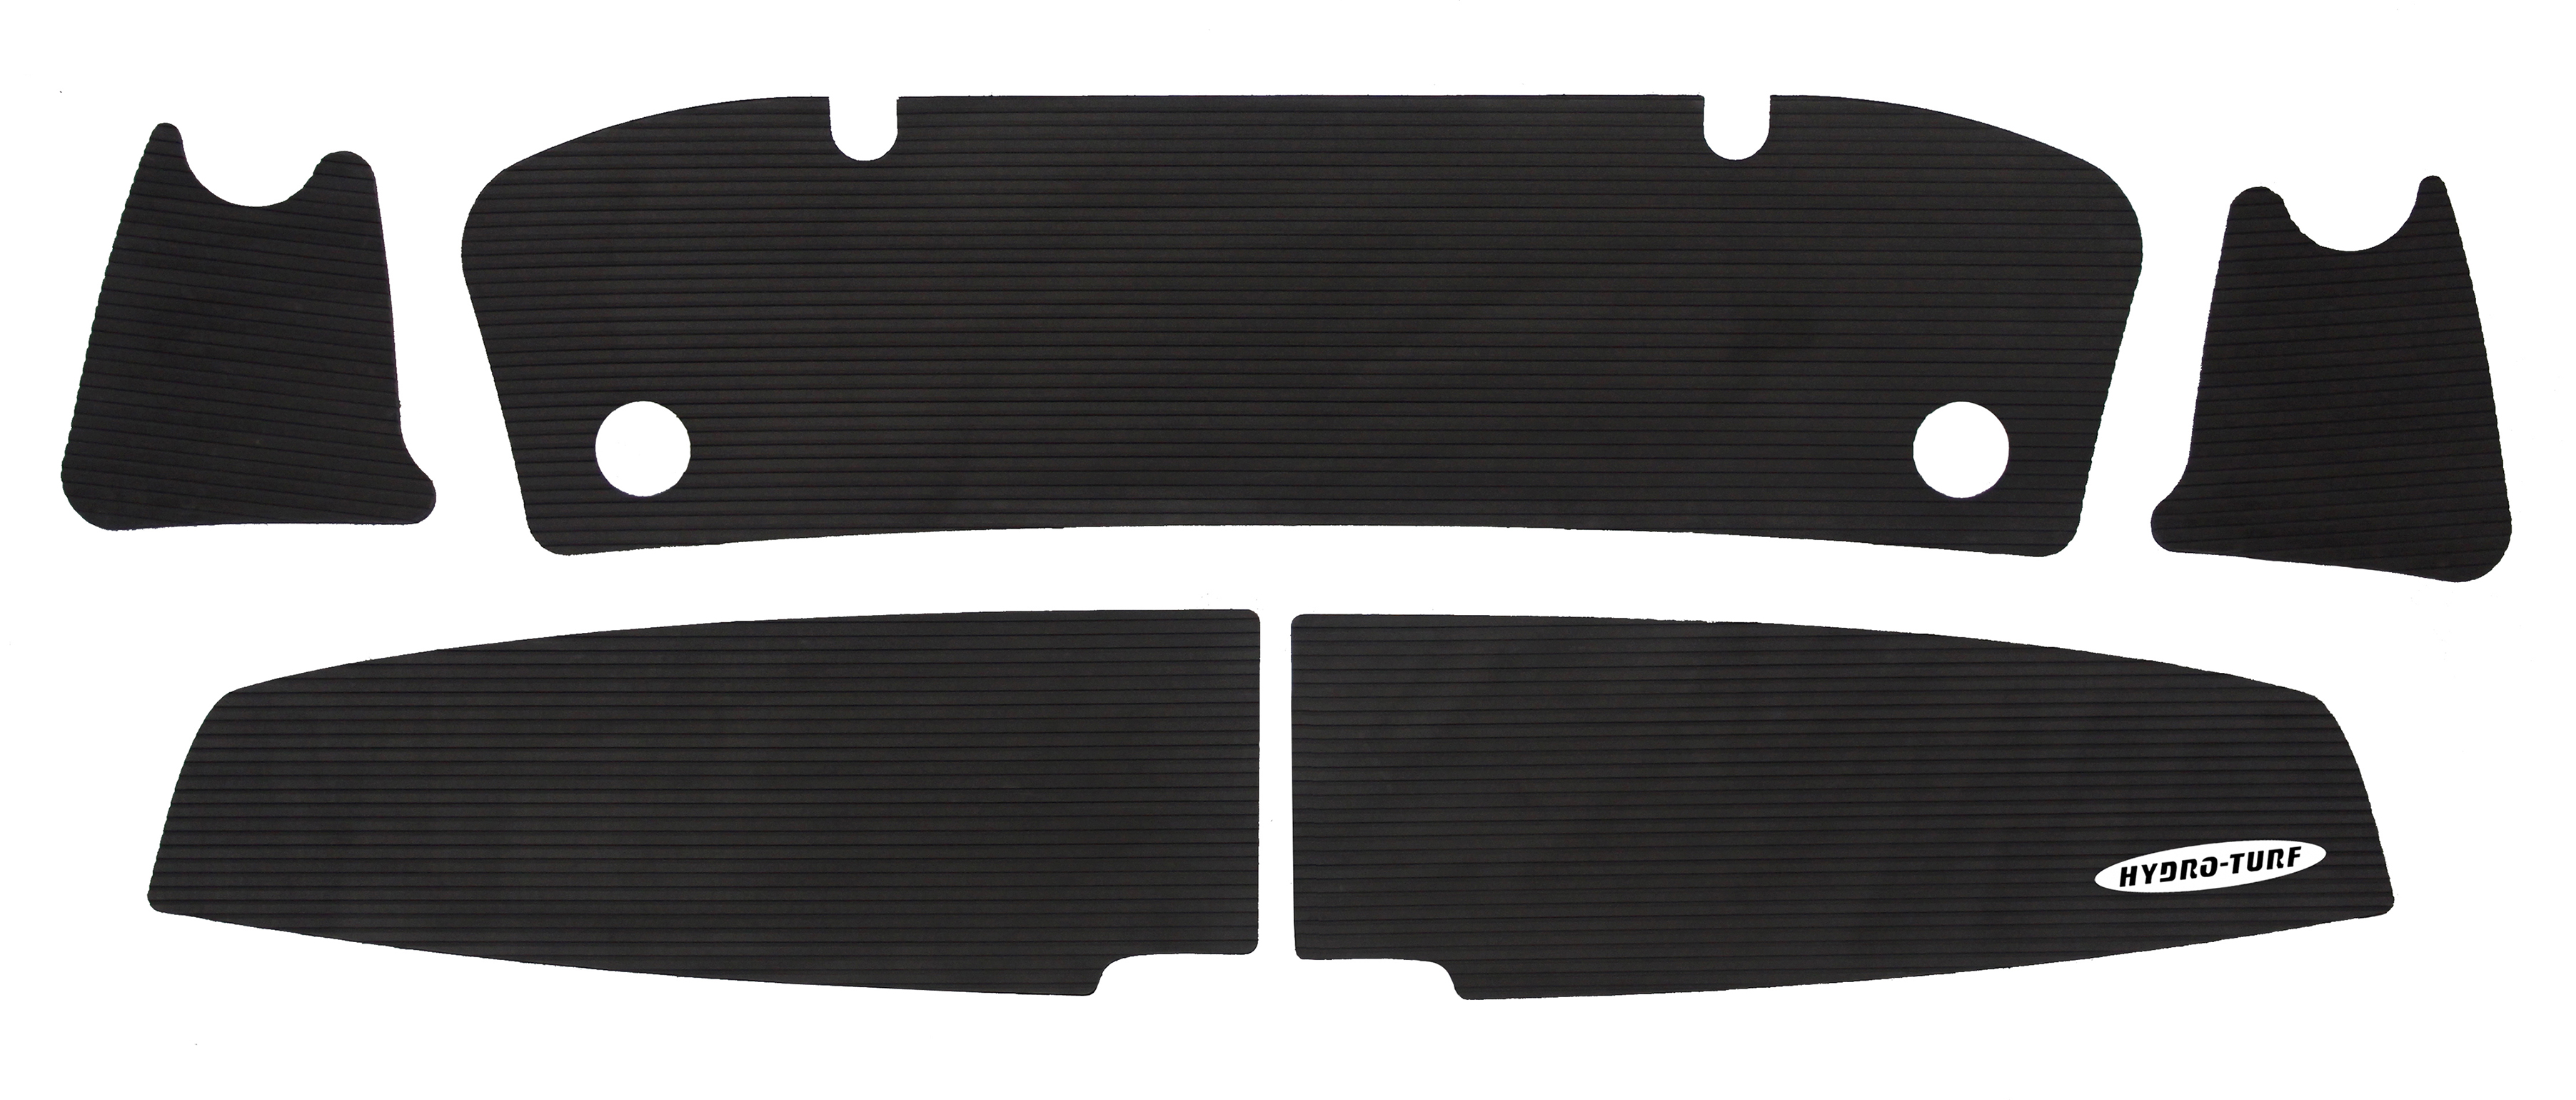 Hydro-Turf Rear Boarding Step Mats Only For Yamaha 2212 X / 212 Ss / Ar 210 / Sx 210 (12-16) - Y08R